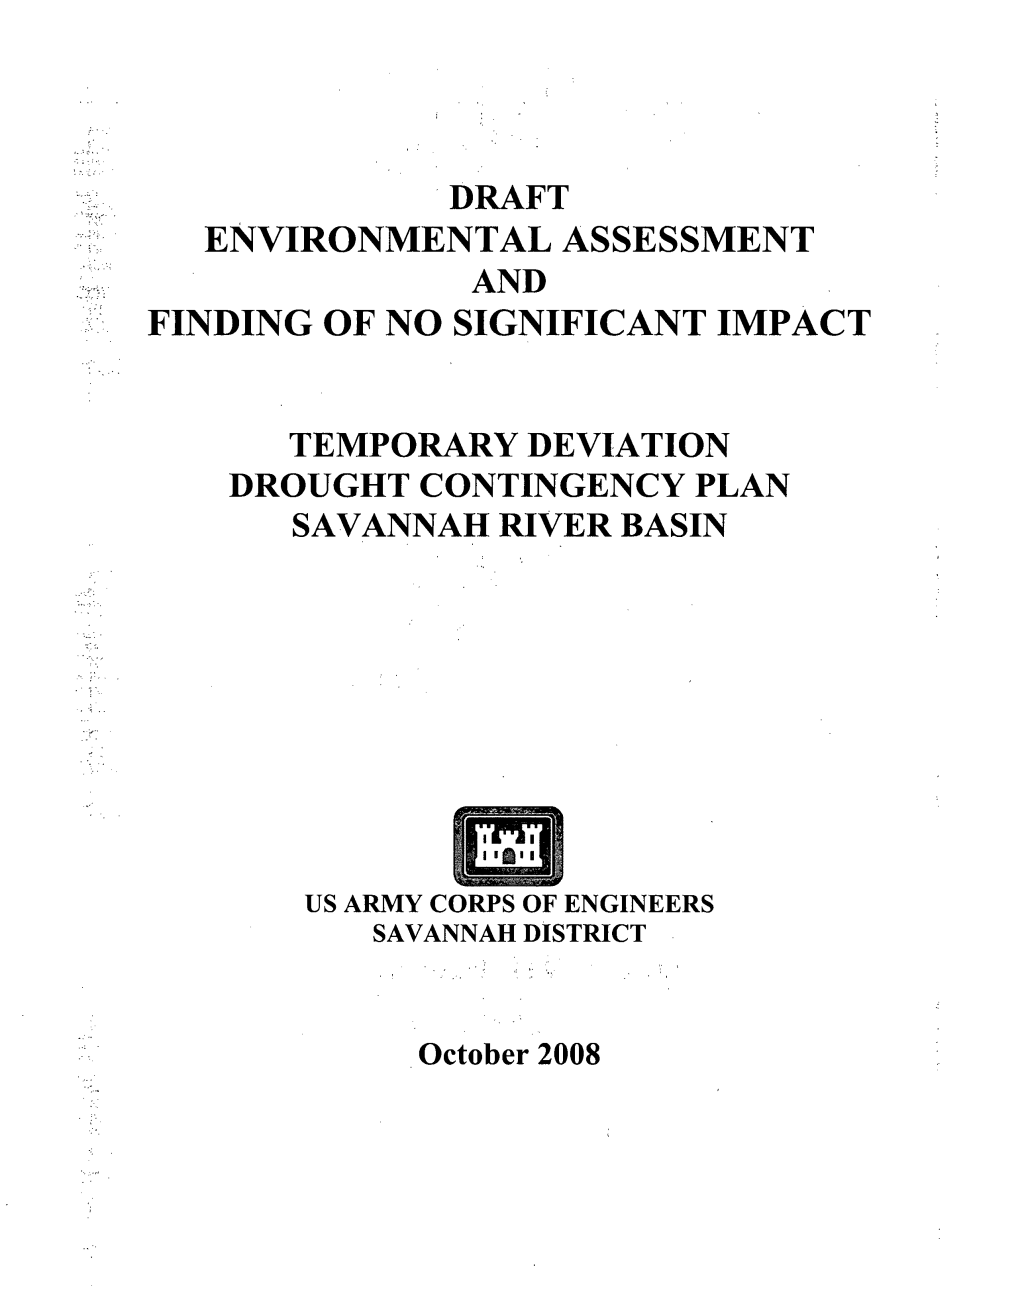 Draft Environmental Assessment and Finding of No Significant Impact